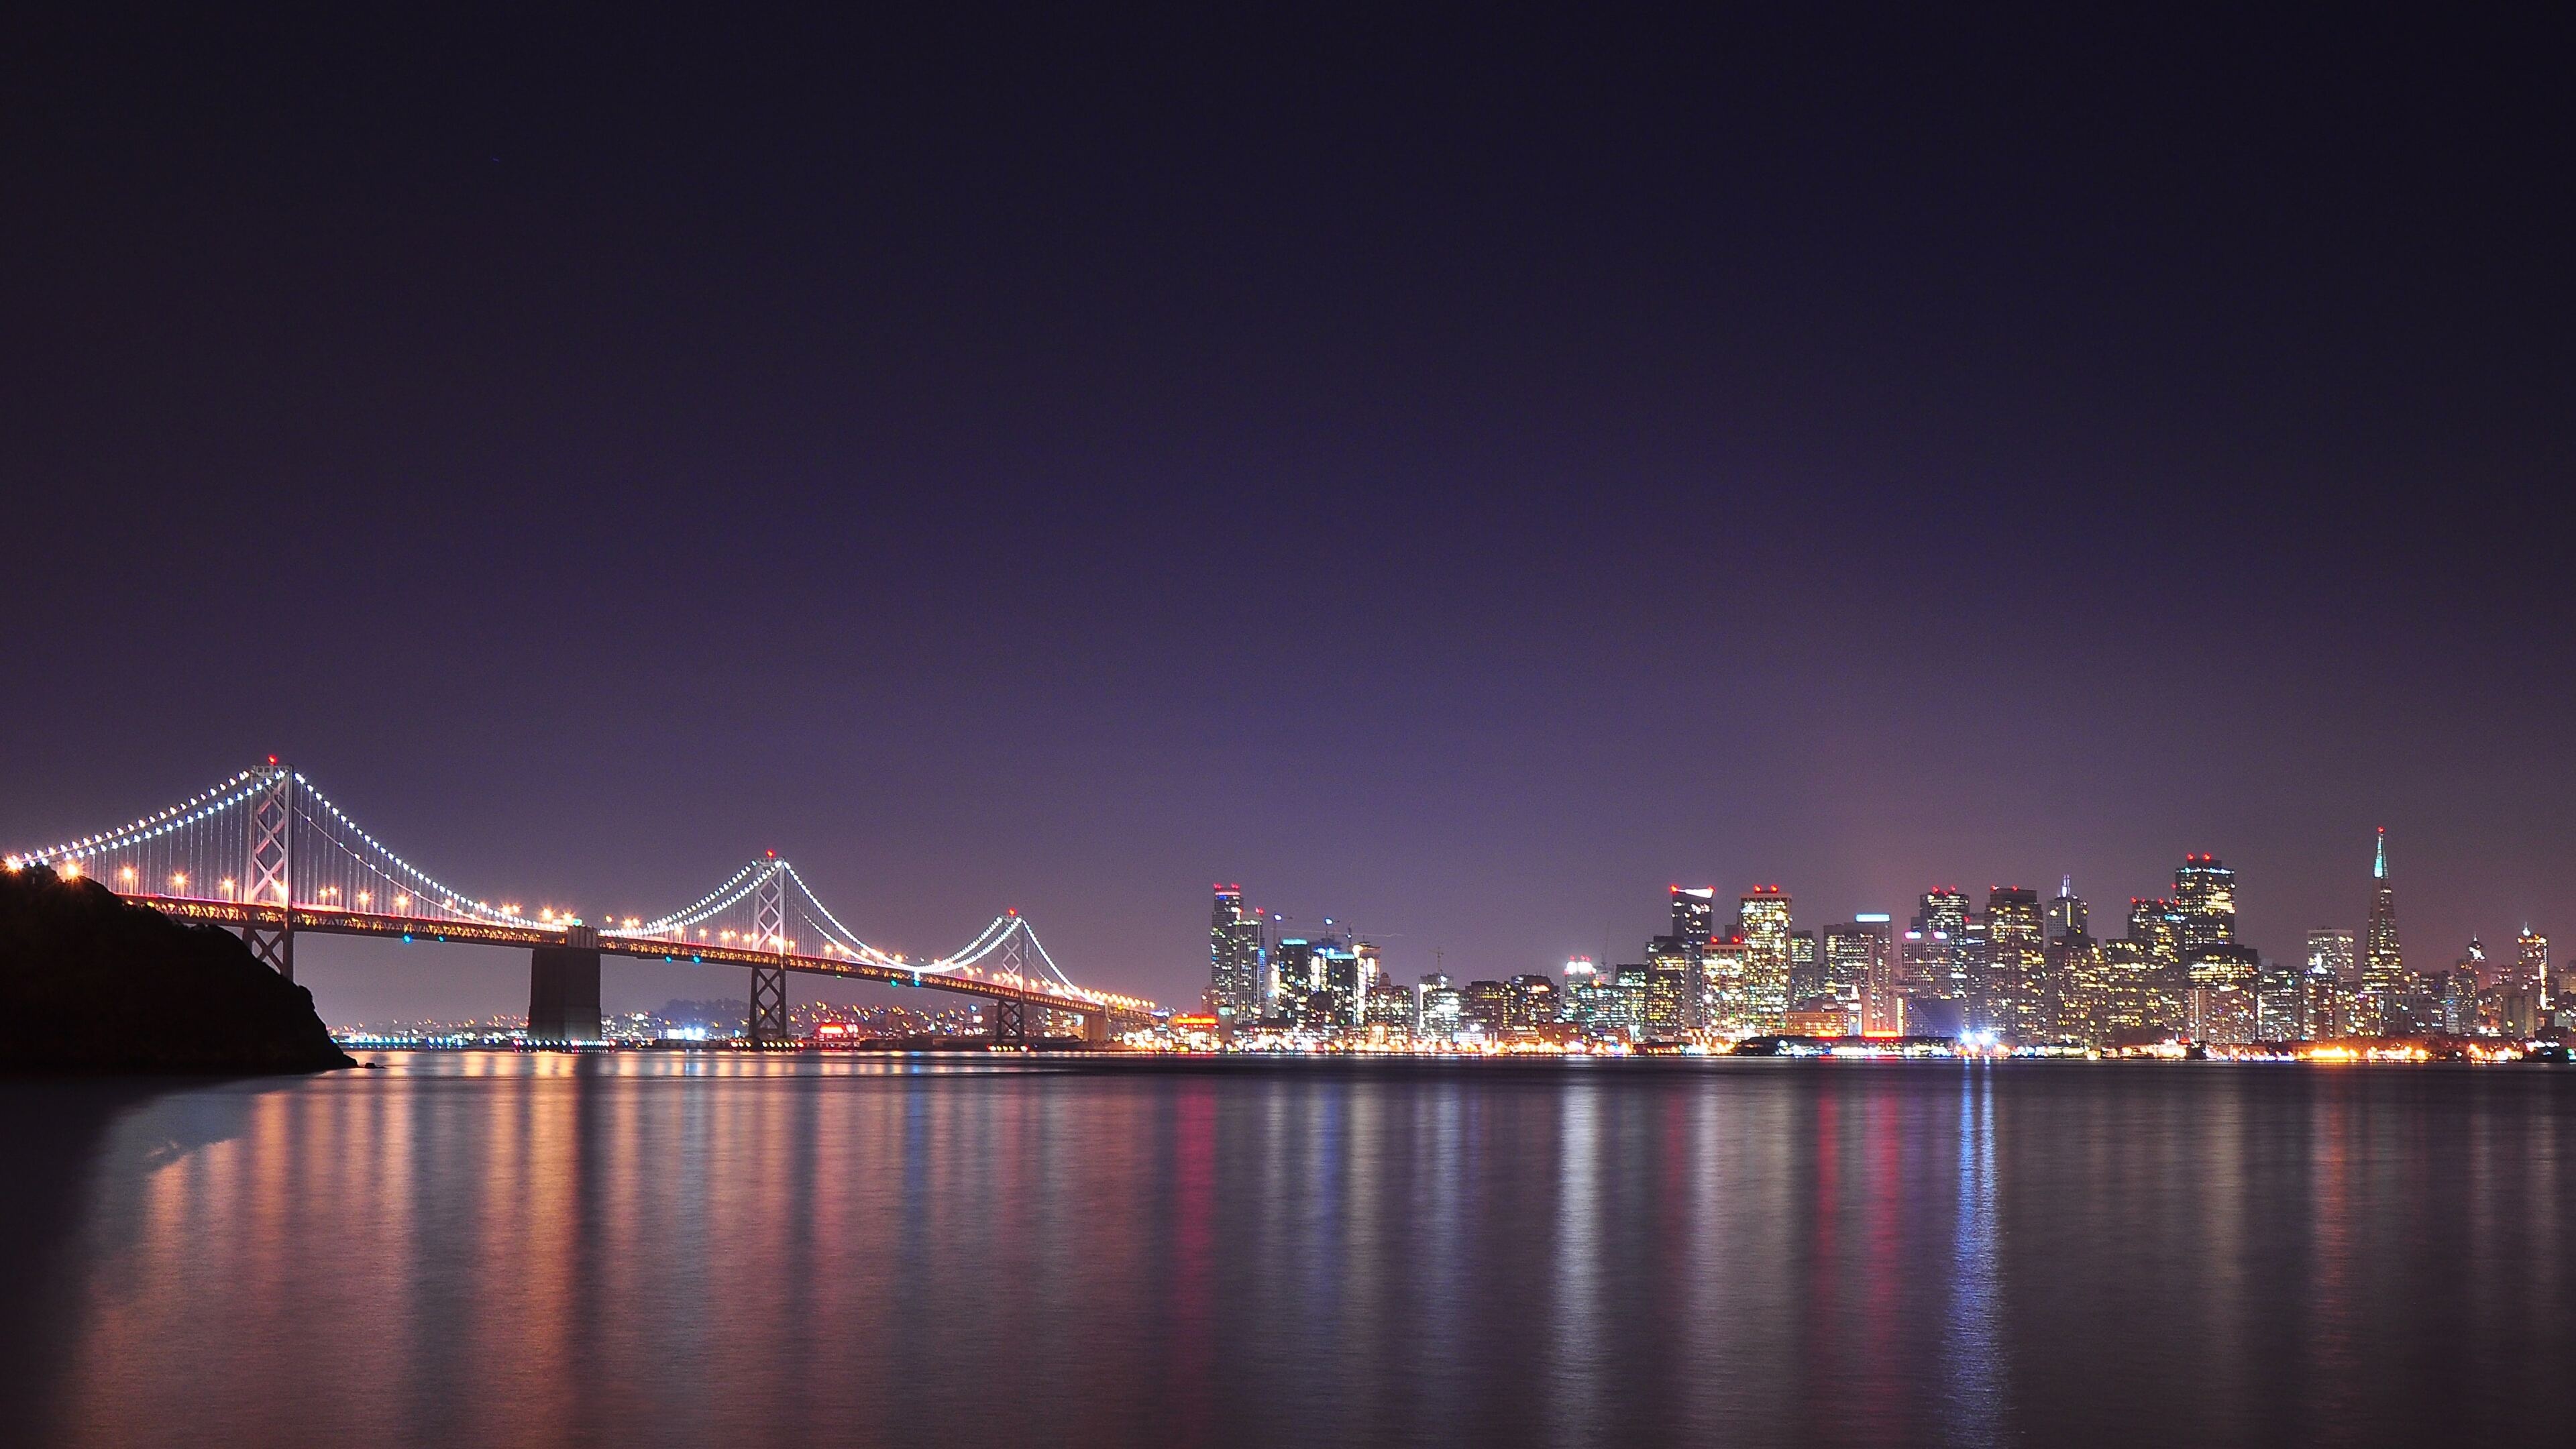 San Francisco: Known for its steep rolling hills and eclectic mix of architecture across varied neighborhoods. 3840x2160 4K Background.